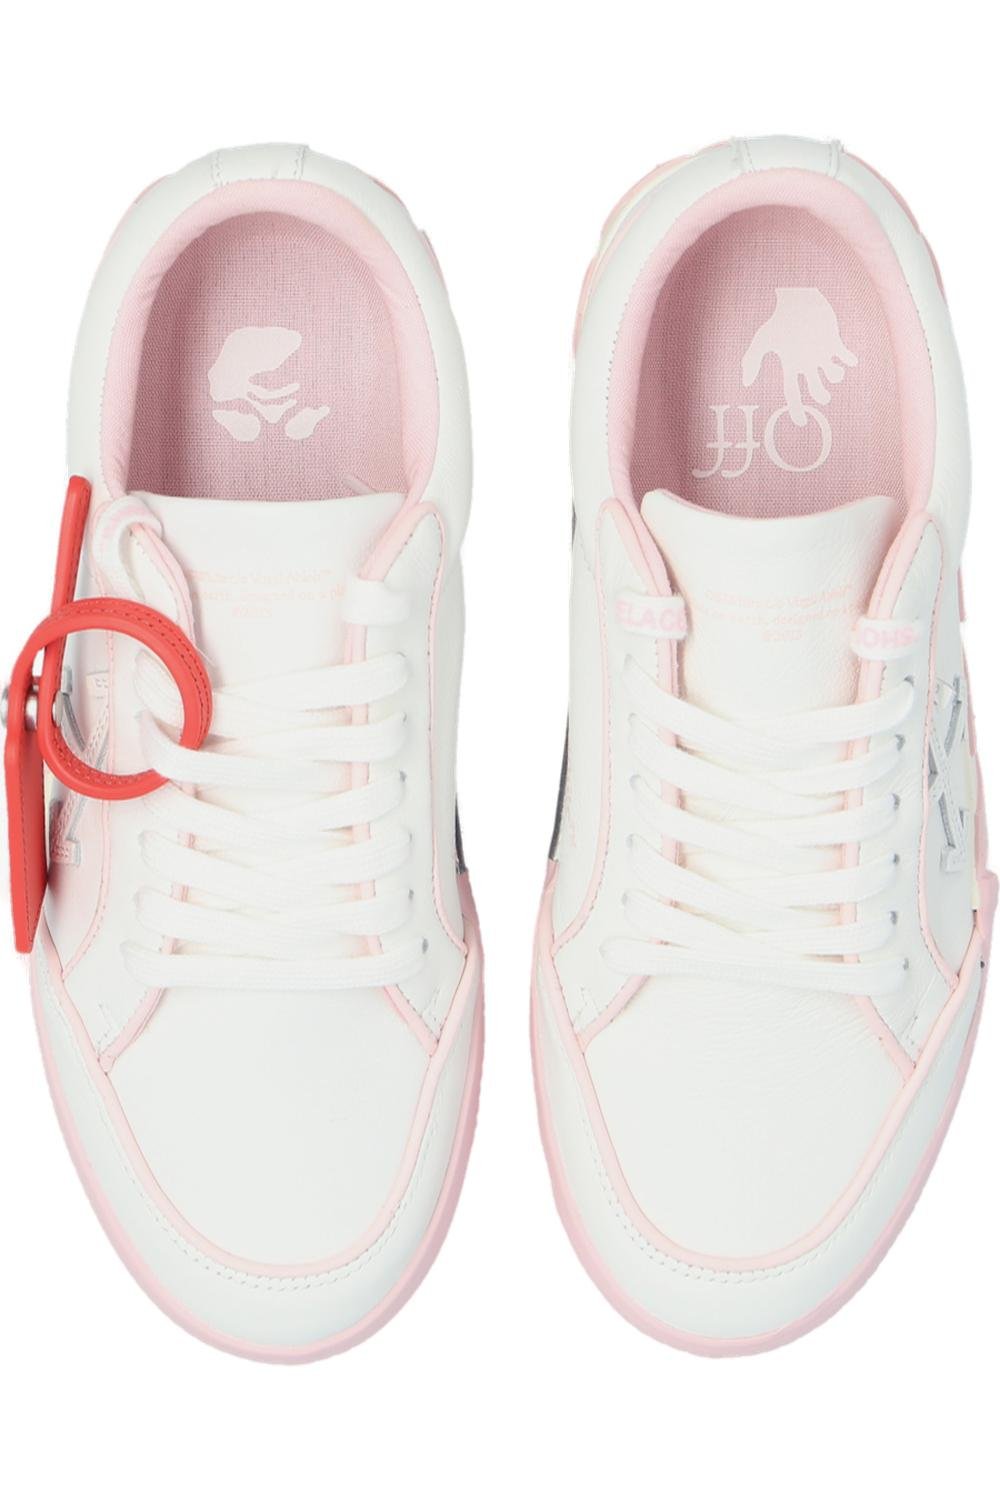 Off-White Low Vulcanized Outlined Lace-Up Sneakers